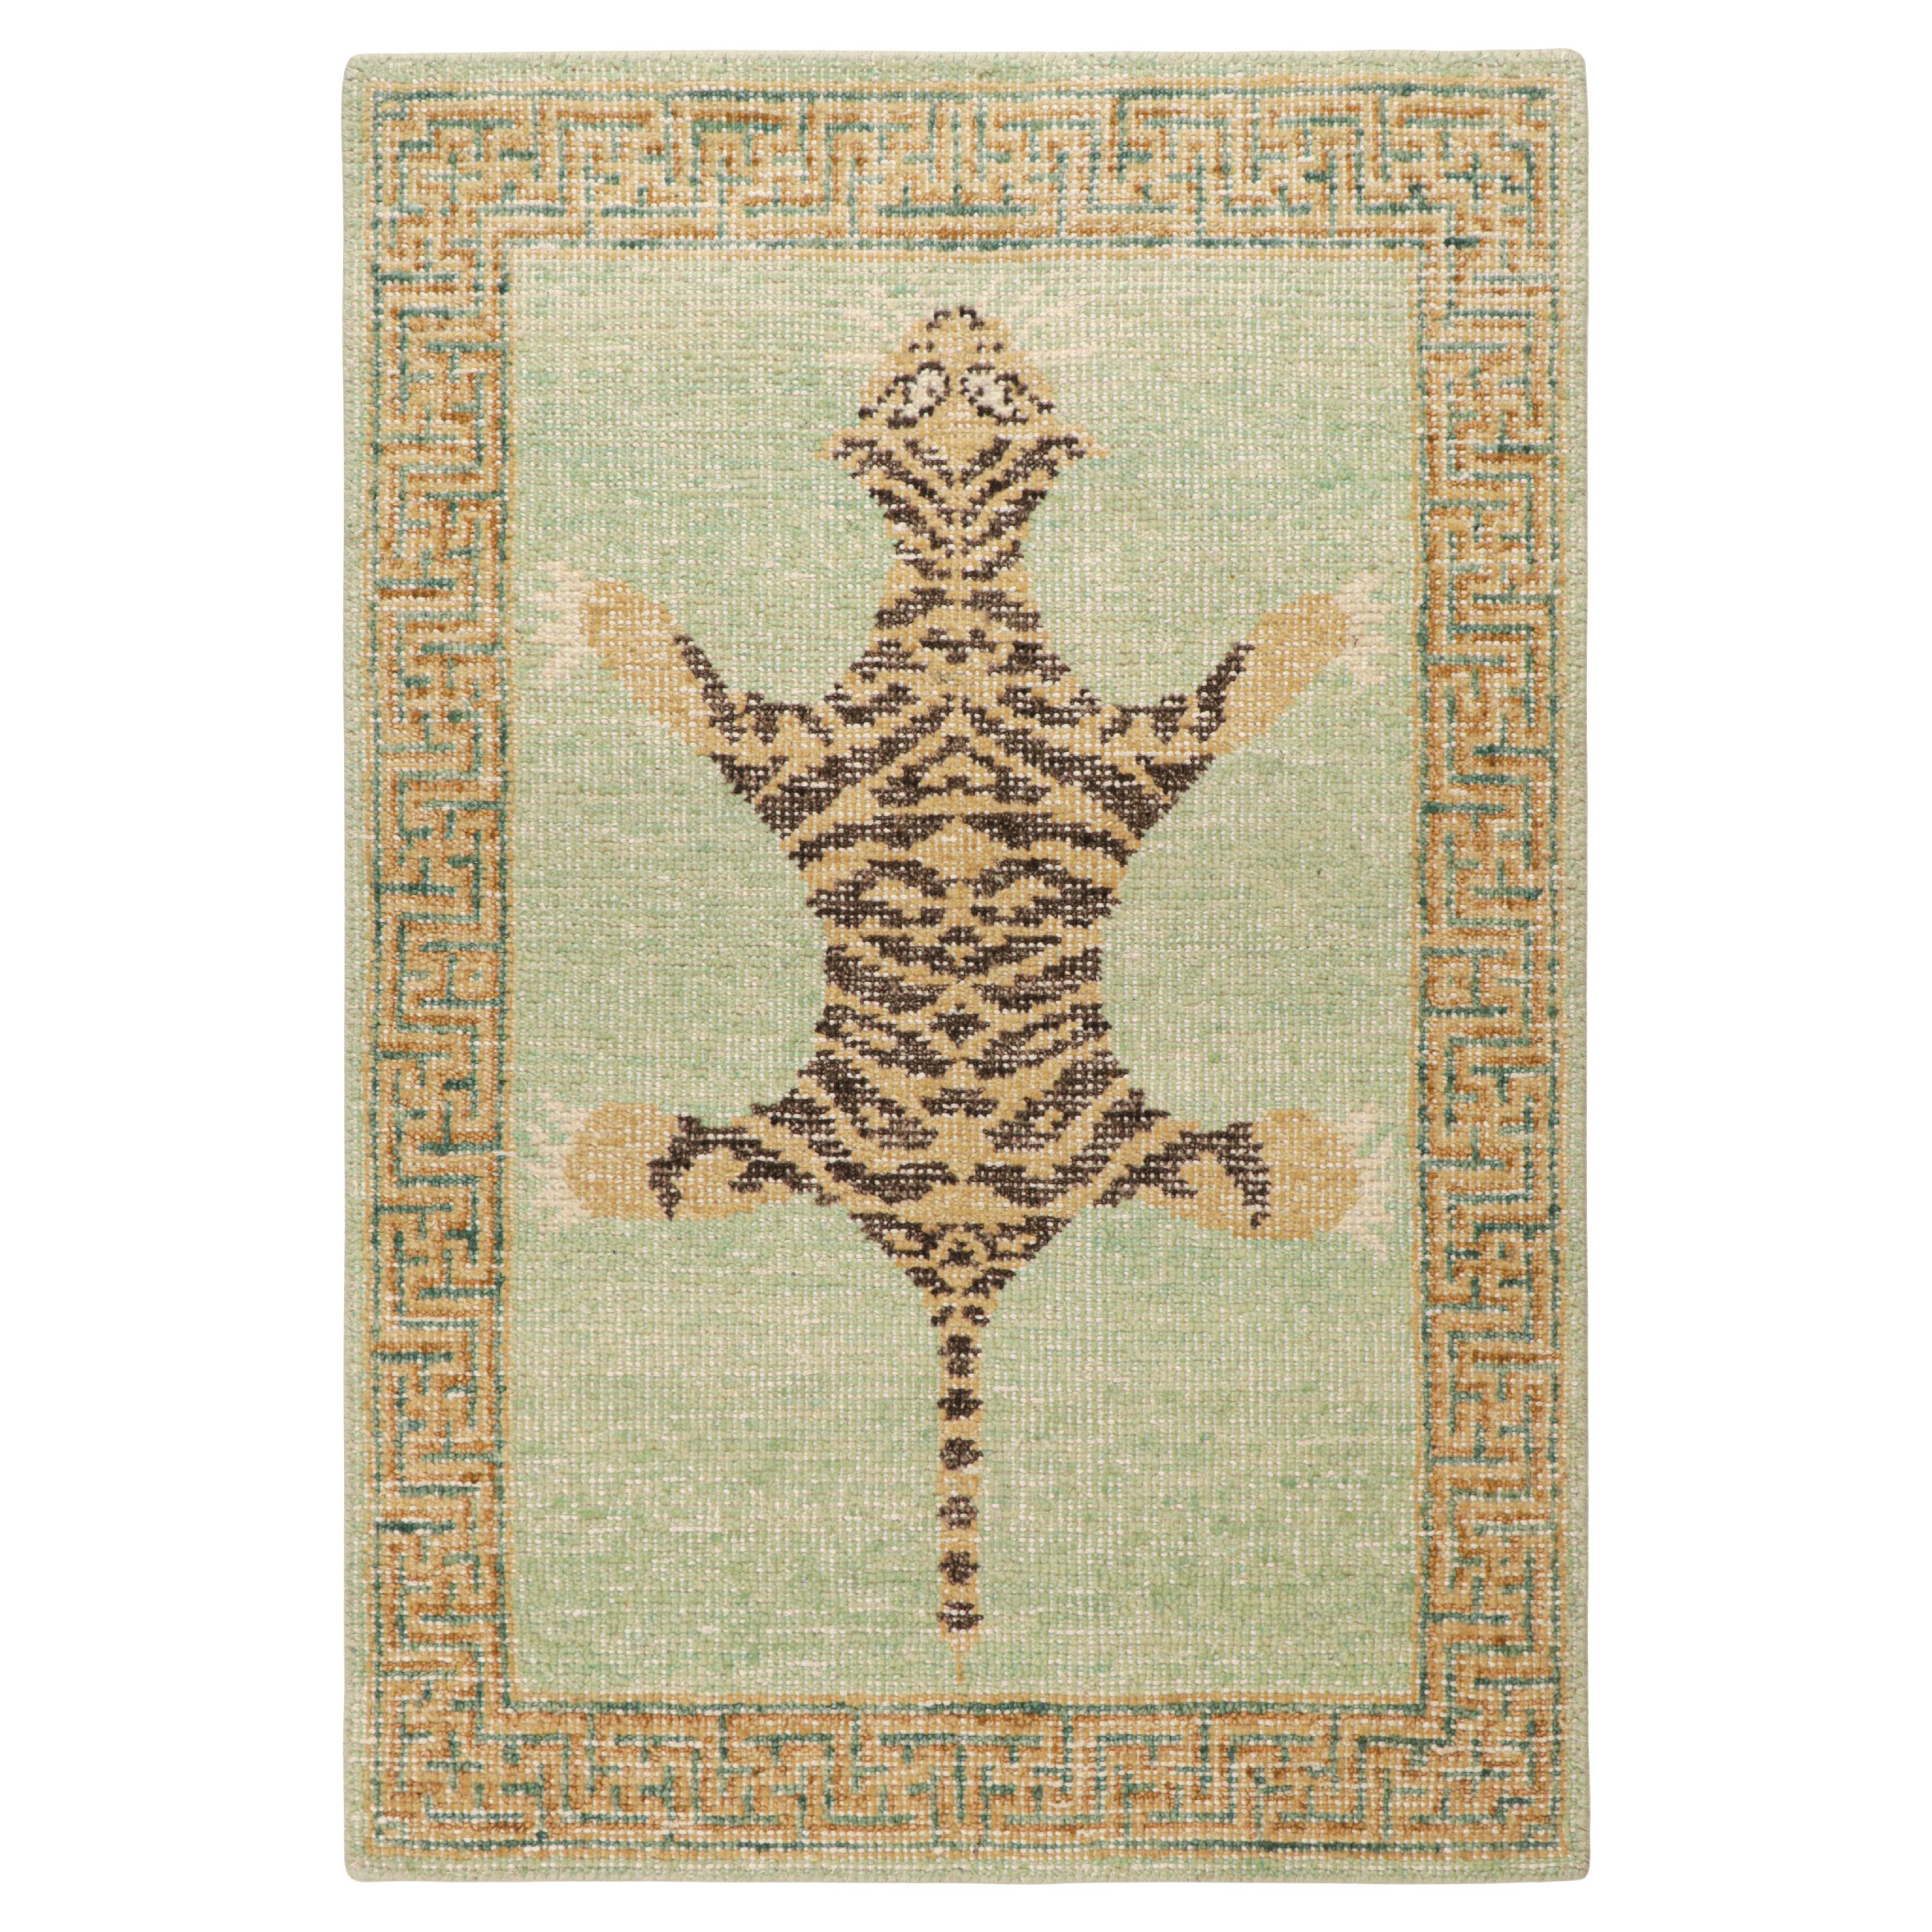 Rug & Kilim’s Modern Tiger Skin Accent Pictorial Rug in Green, Beige and Black For Sale